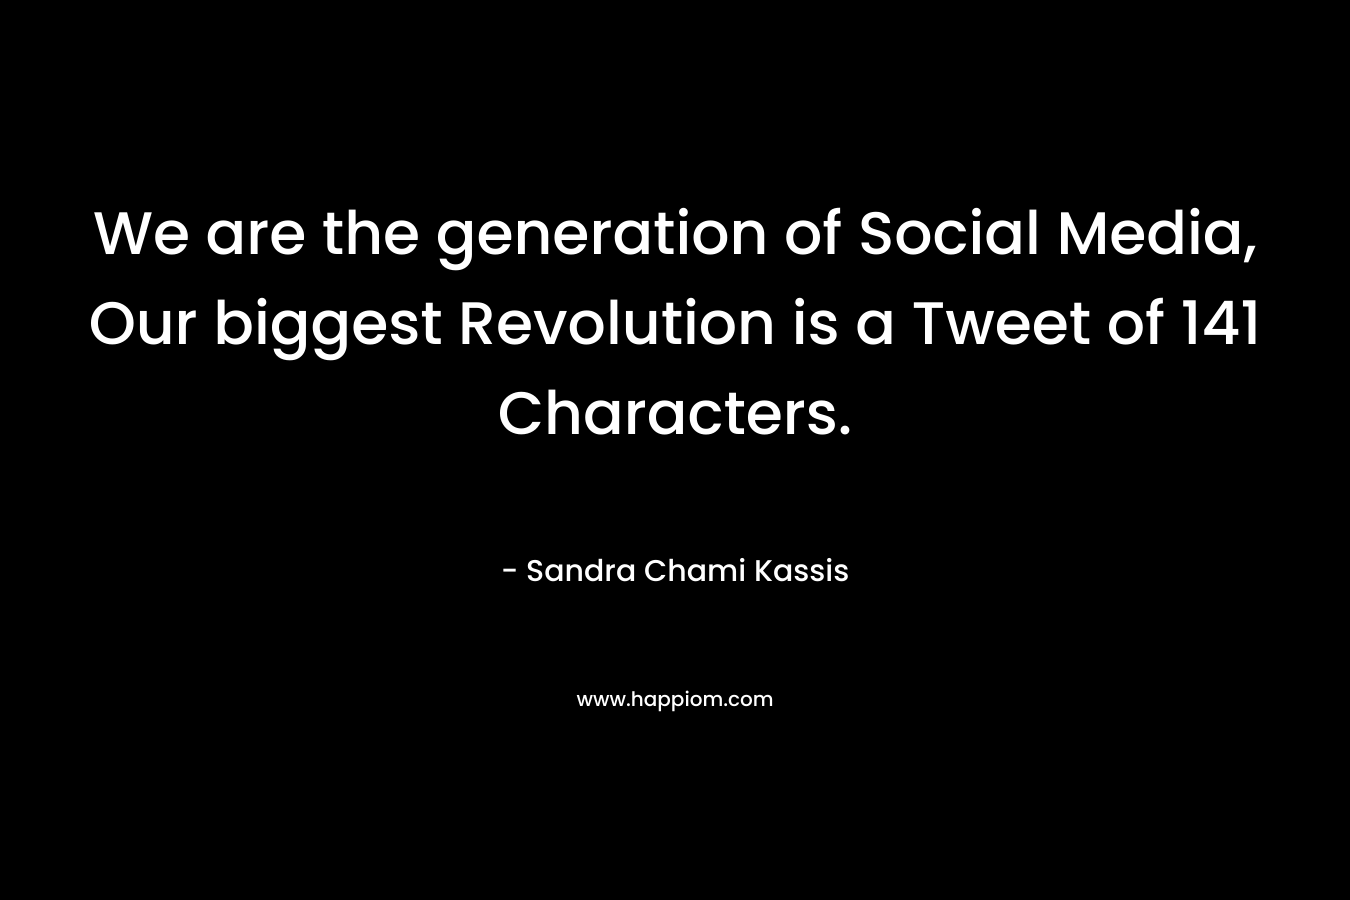 We are the generation of Social Media, Our biggest Revolution is a Tweet of 141 Characters. – Sandra Chami Kassis